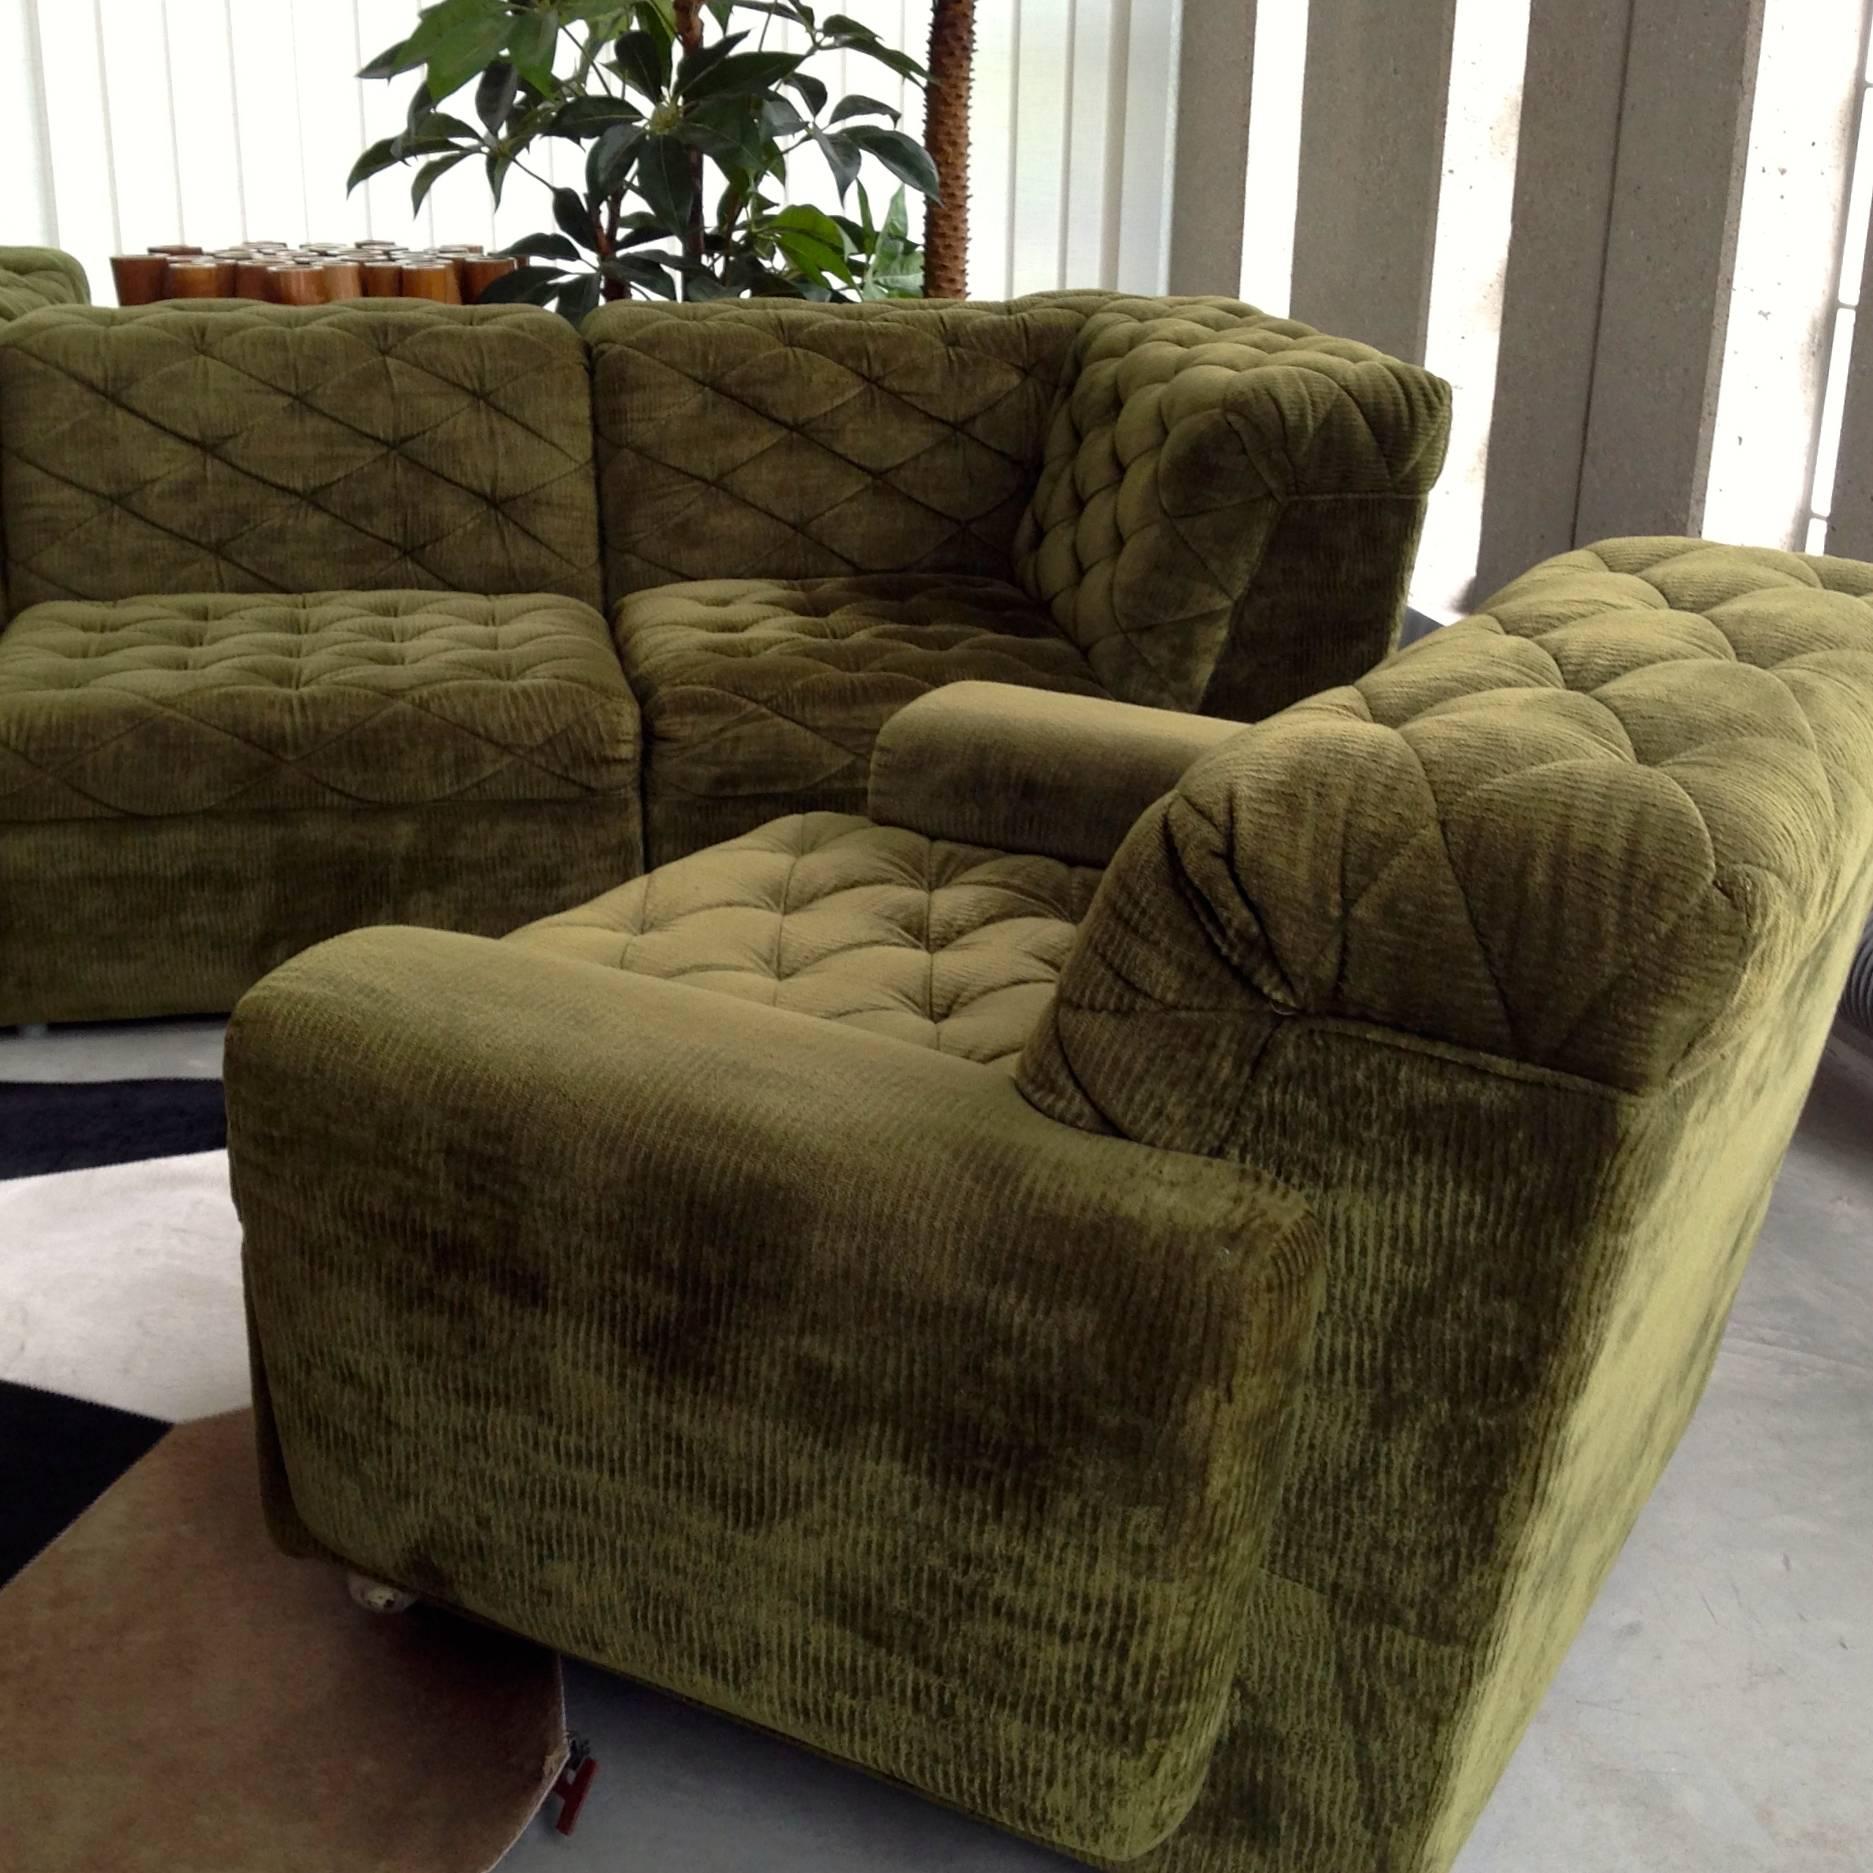 Hollywood Regency Modular Sofa with Snake Pattern in Beautiful Grass Green Velvet, Top Condition